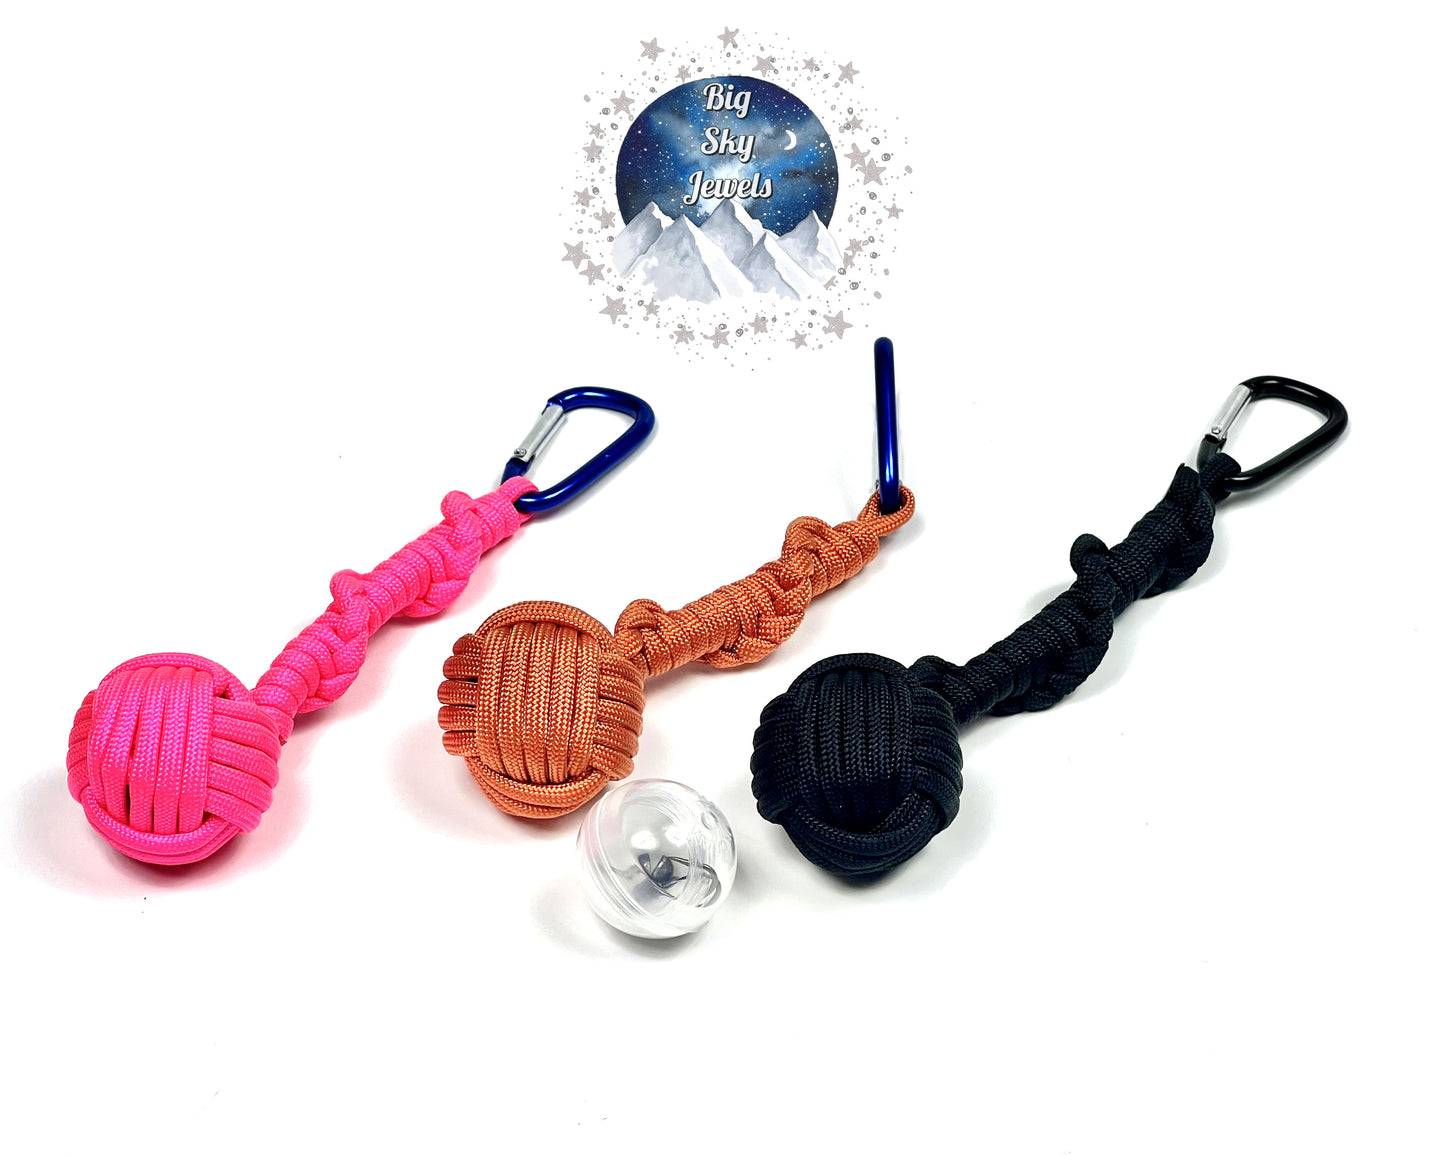 Monkey Fist 550 Paracord Emergency Fishing Kit Ages 13+, Teens